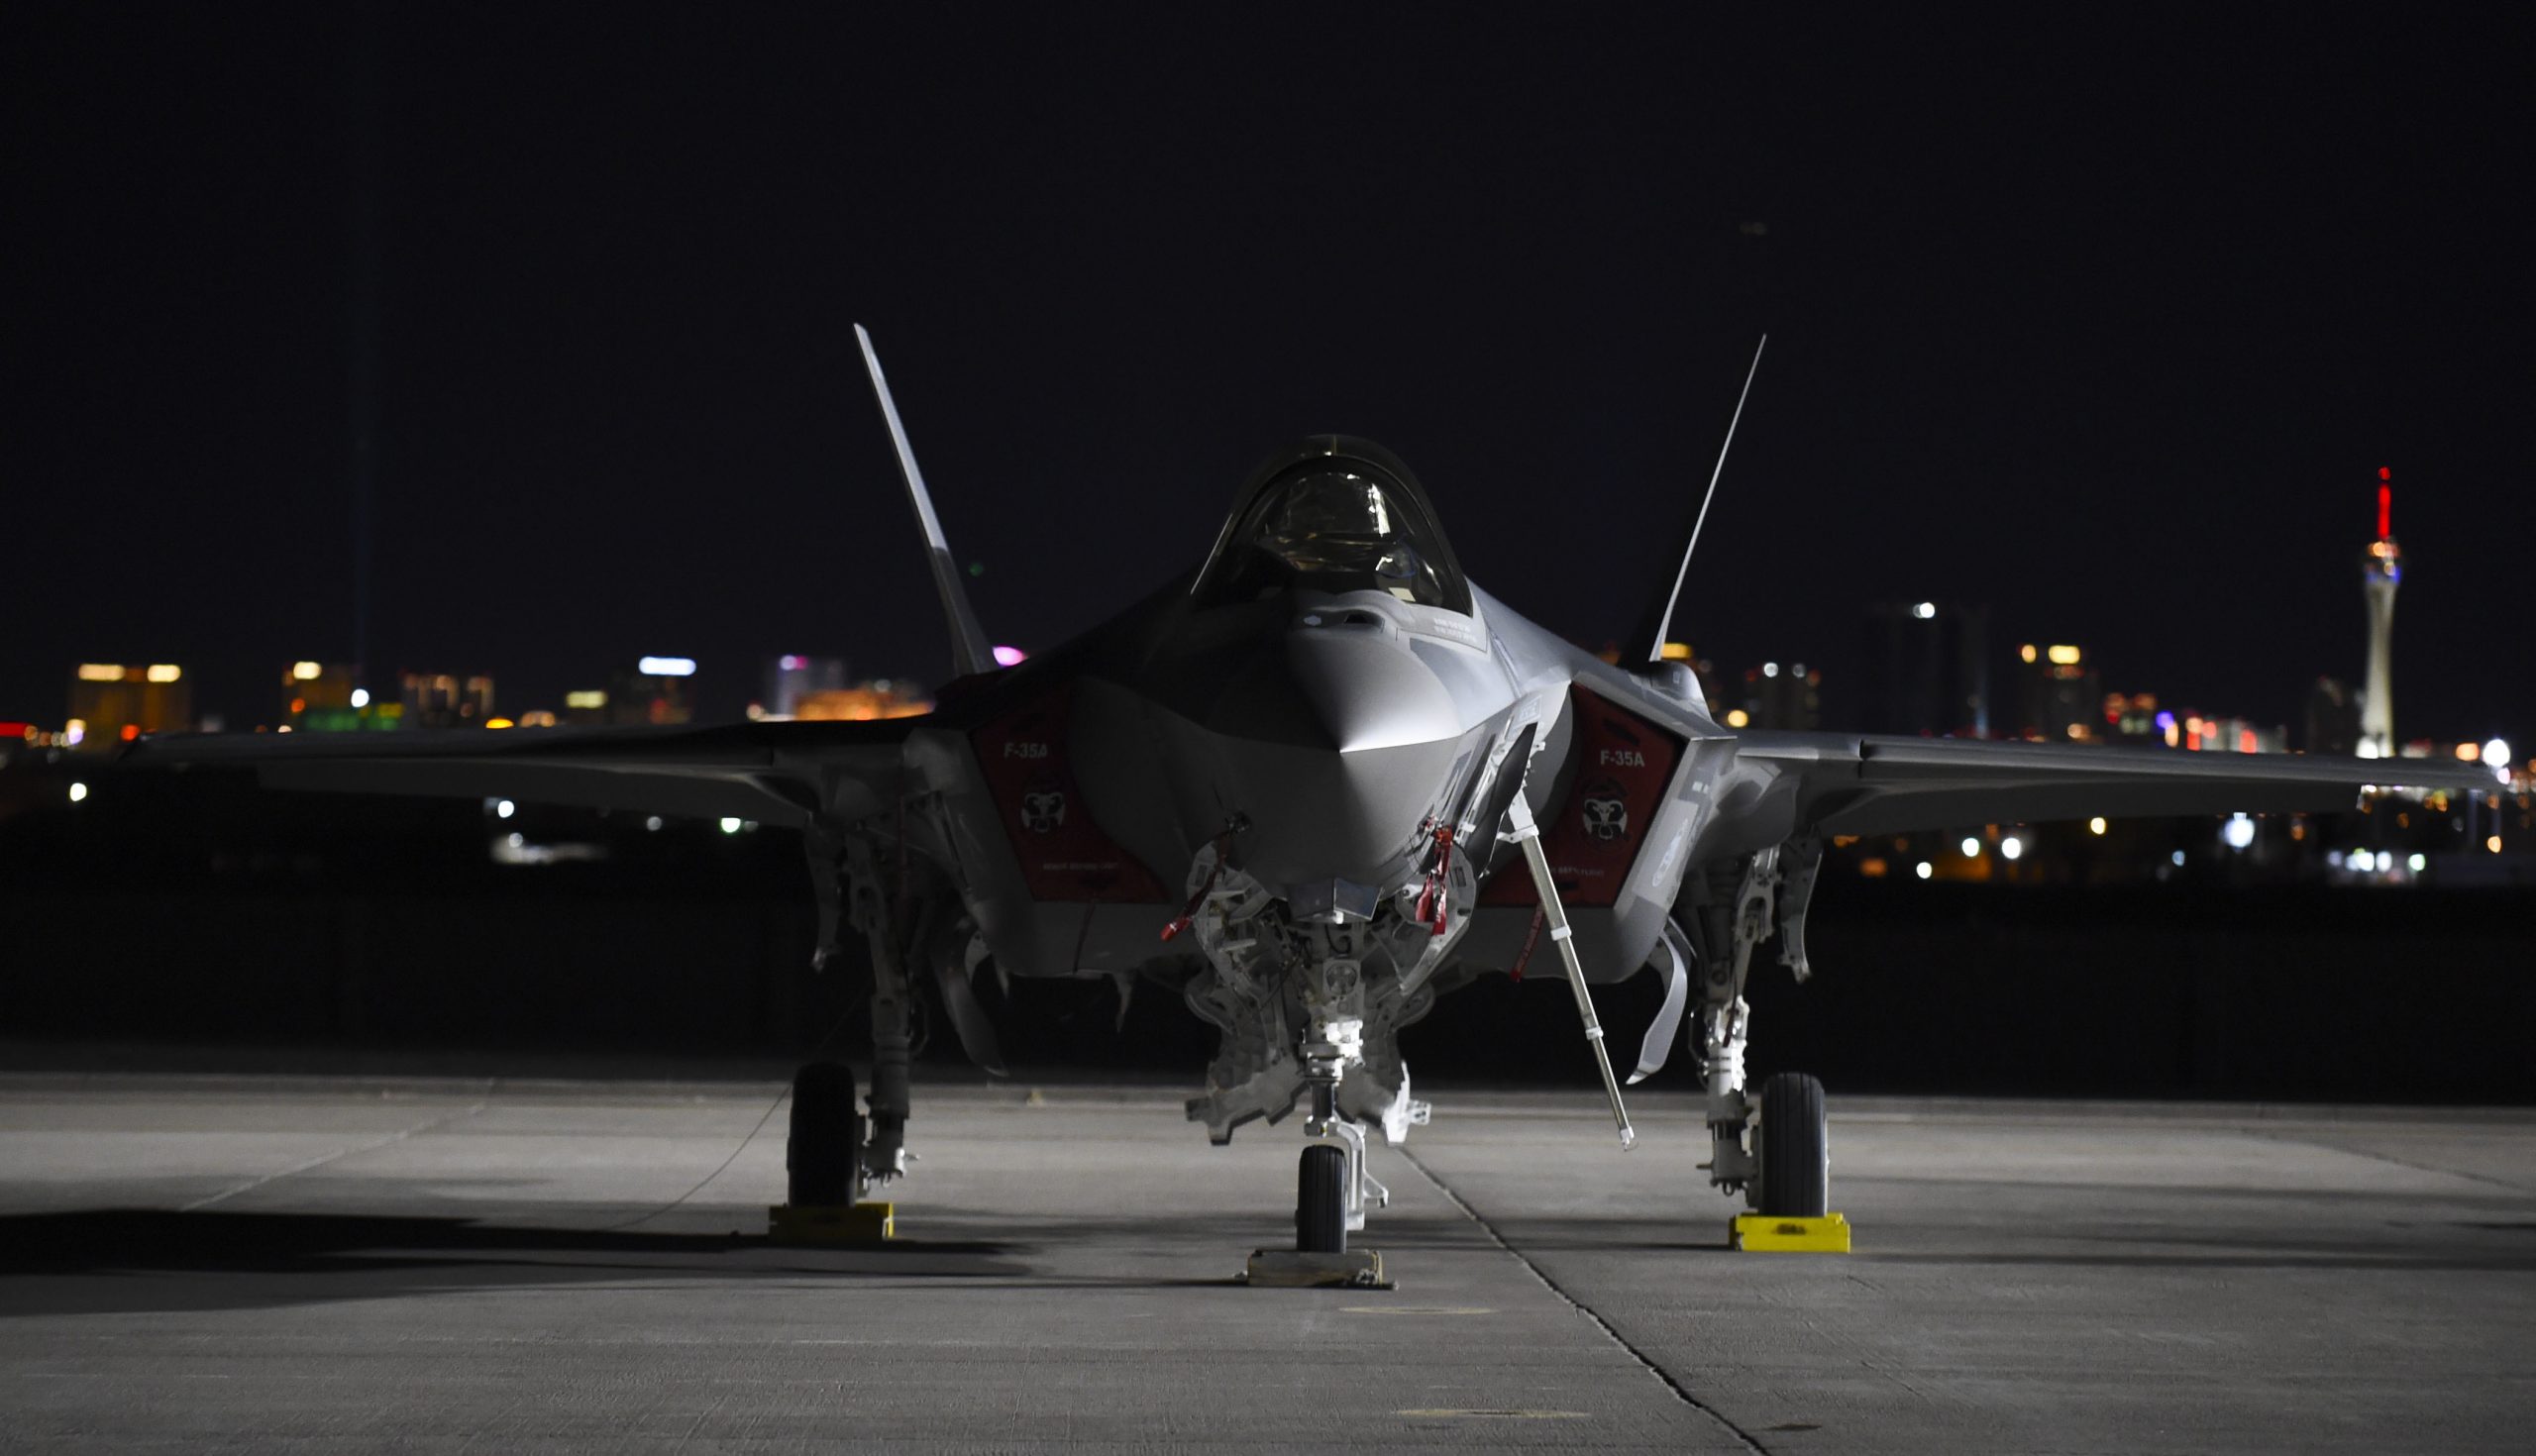 An F-35A Lightning II from the 388th Fighter Wing, Hill Air Force Base, Utah, sits on the flight line during Red Flag 17-1 at Nellis Air Force Base, Nev., Jan. 12, 2017. This was the first-time F-35A crews participated in Red Flag, the Air Force’s premiere air-to-air combat training exercise. Air Force photo by Staff Sgt. Natasha Stannard. -